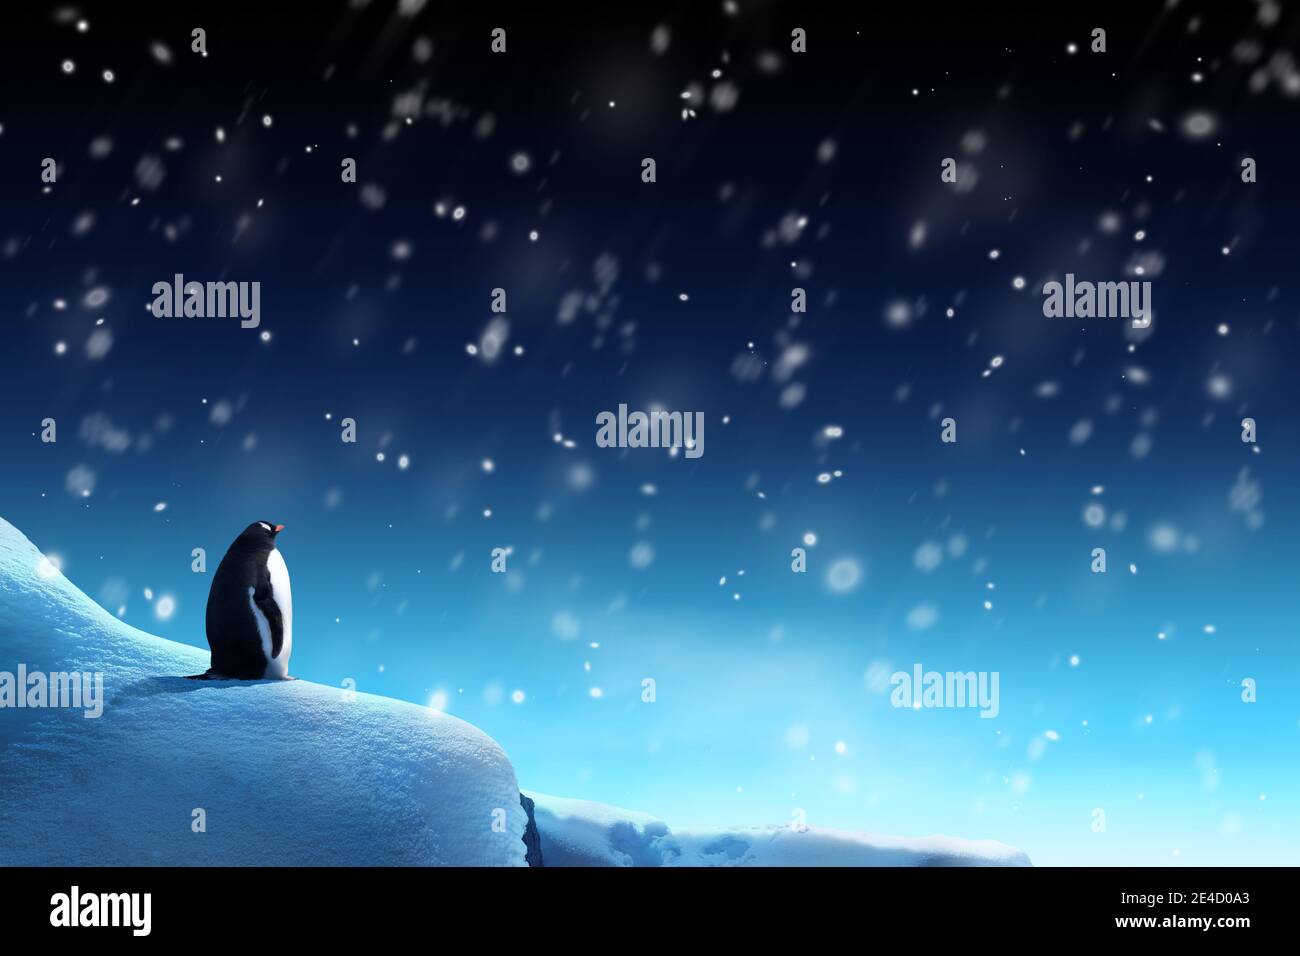 Winter night scene with a penguin watching snow falling down. Christmas holiday theme. Stock Photo